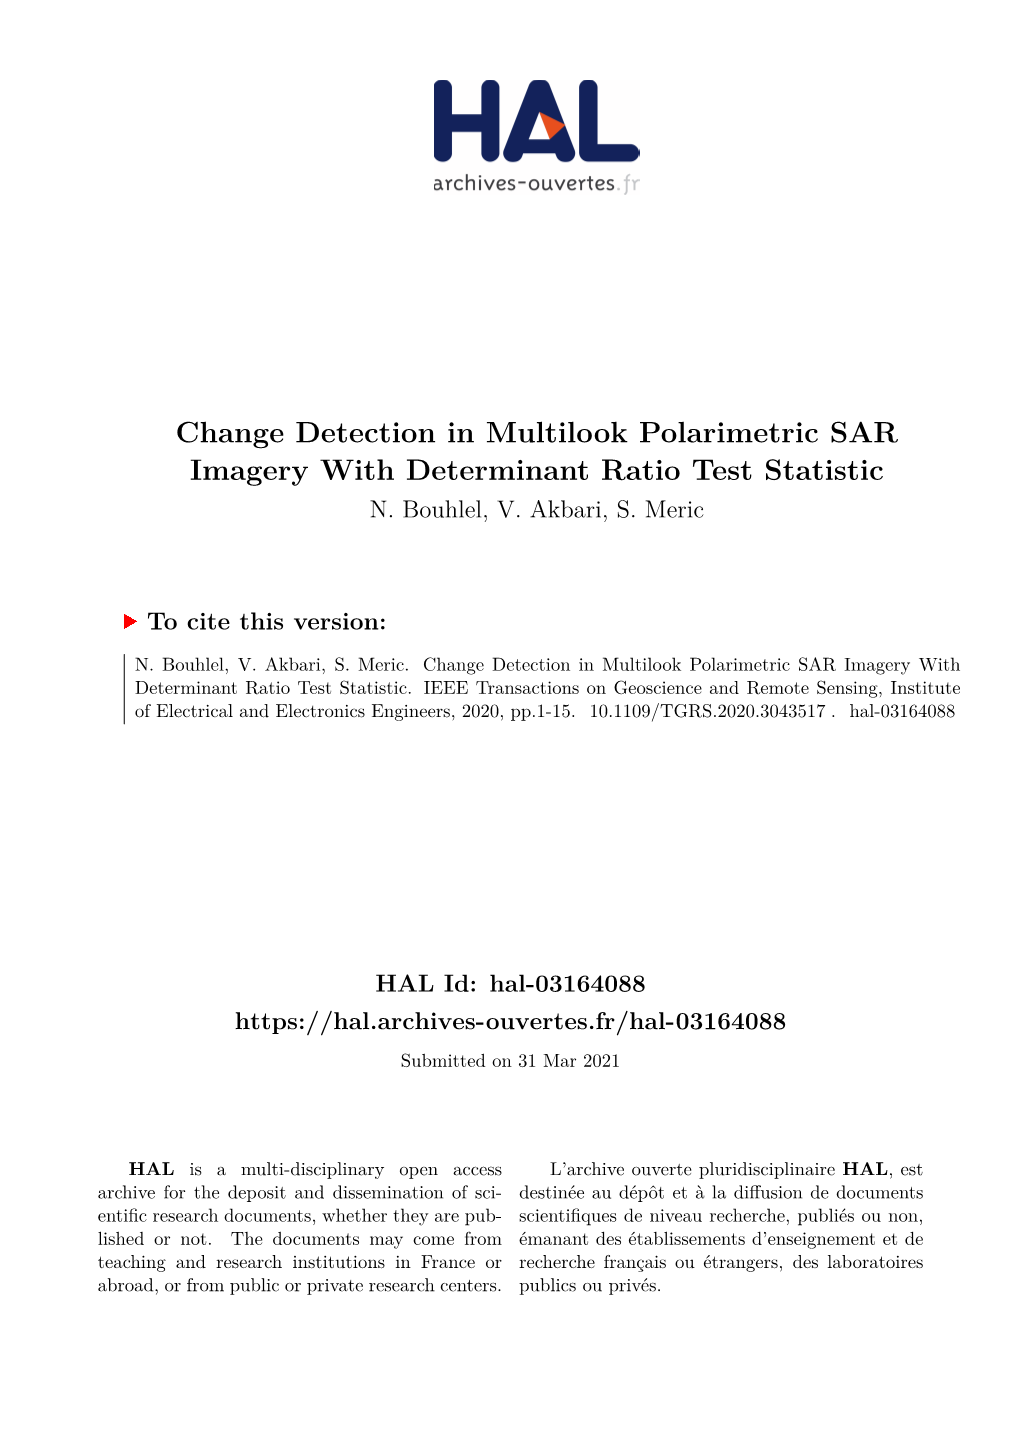 Change Detection in Multilook Polarimetric SAR Imagery with Determinant Ratio Test Statistic N